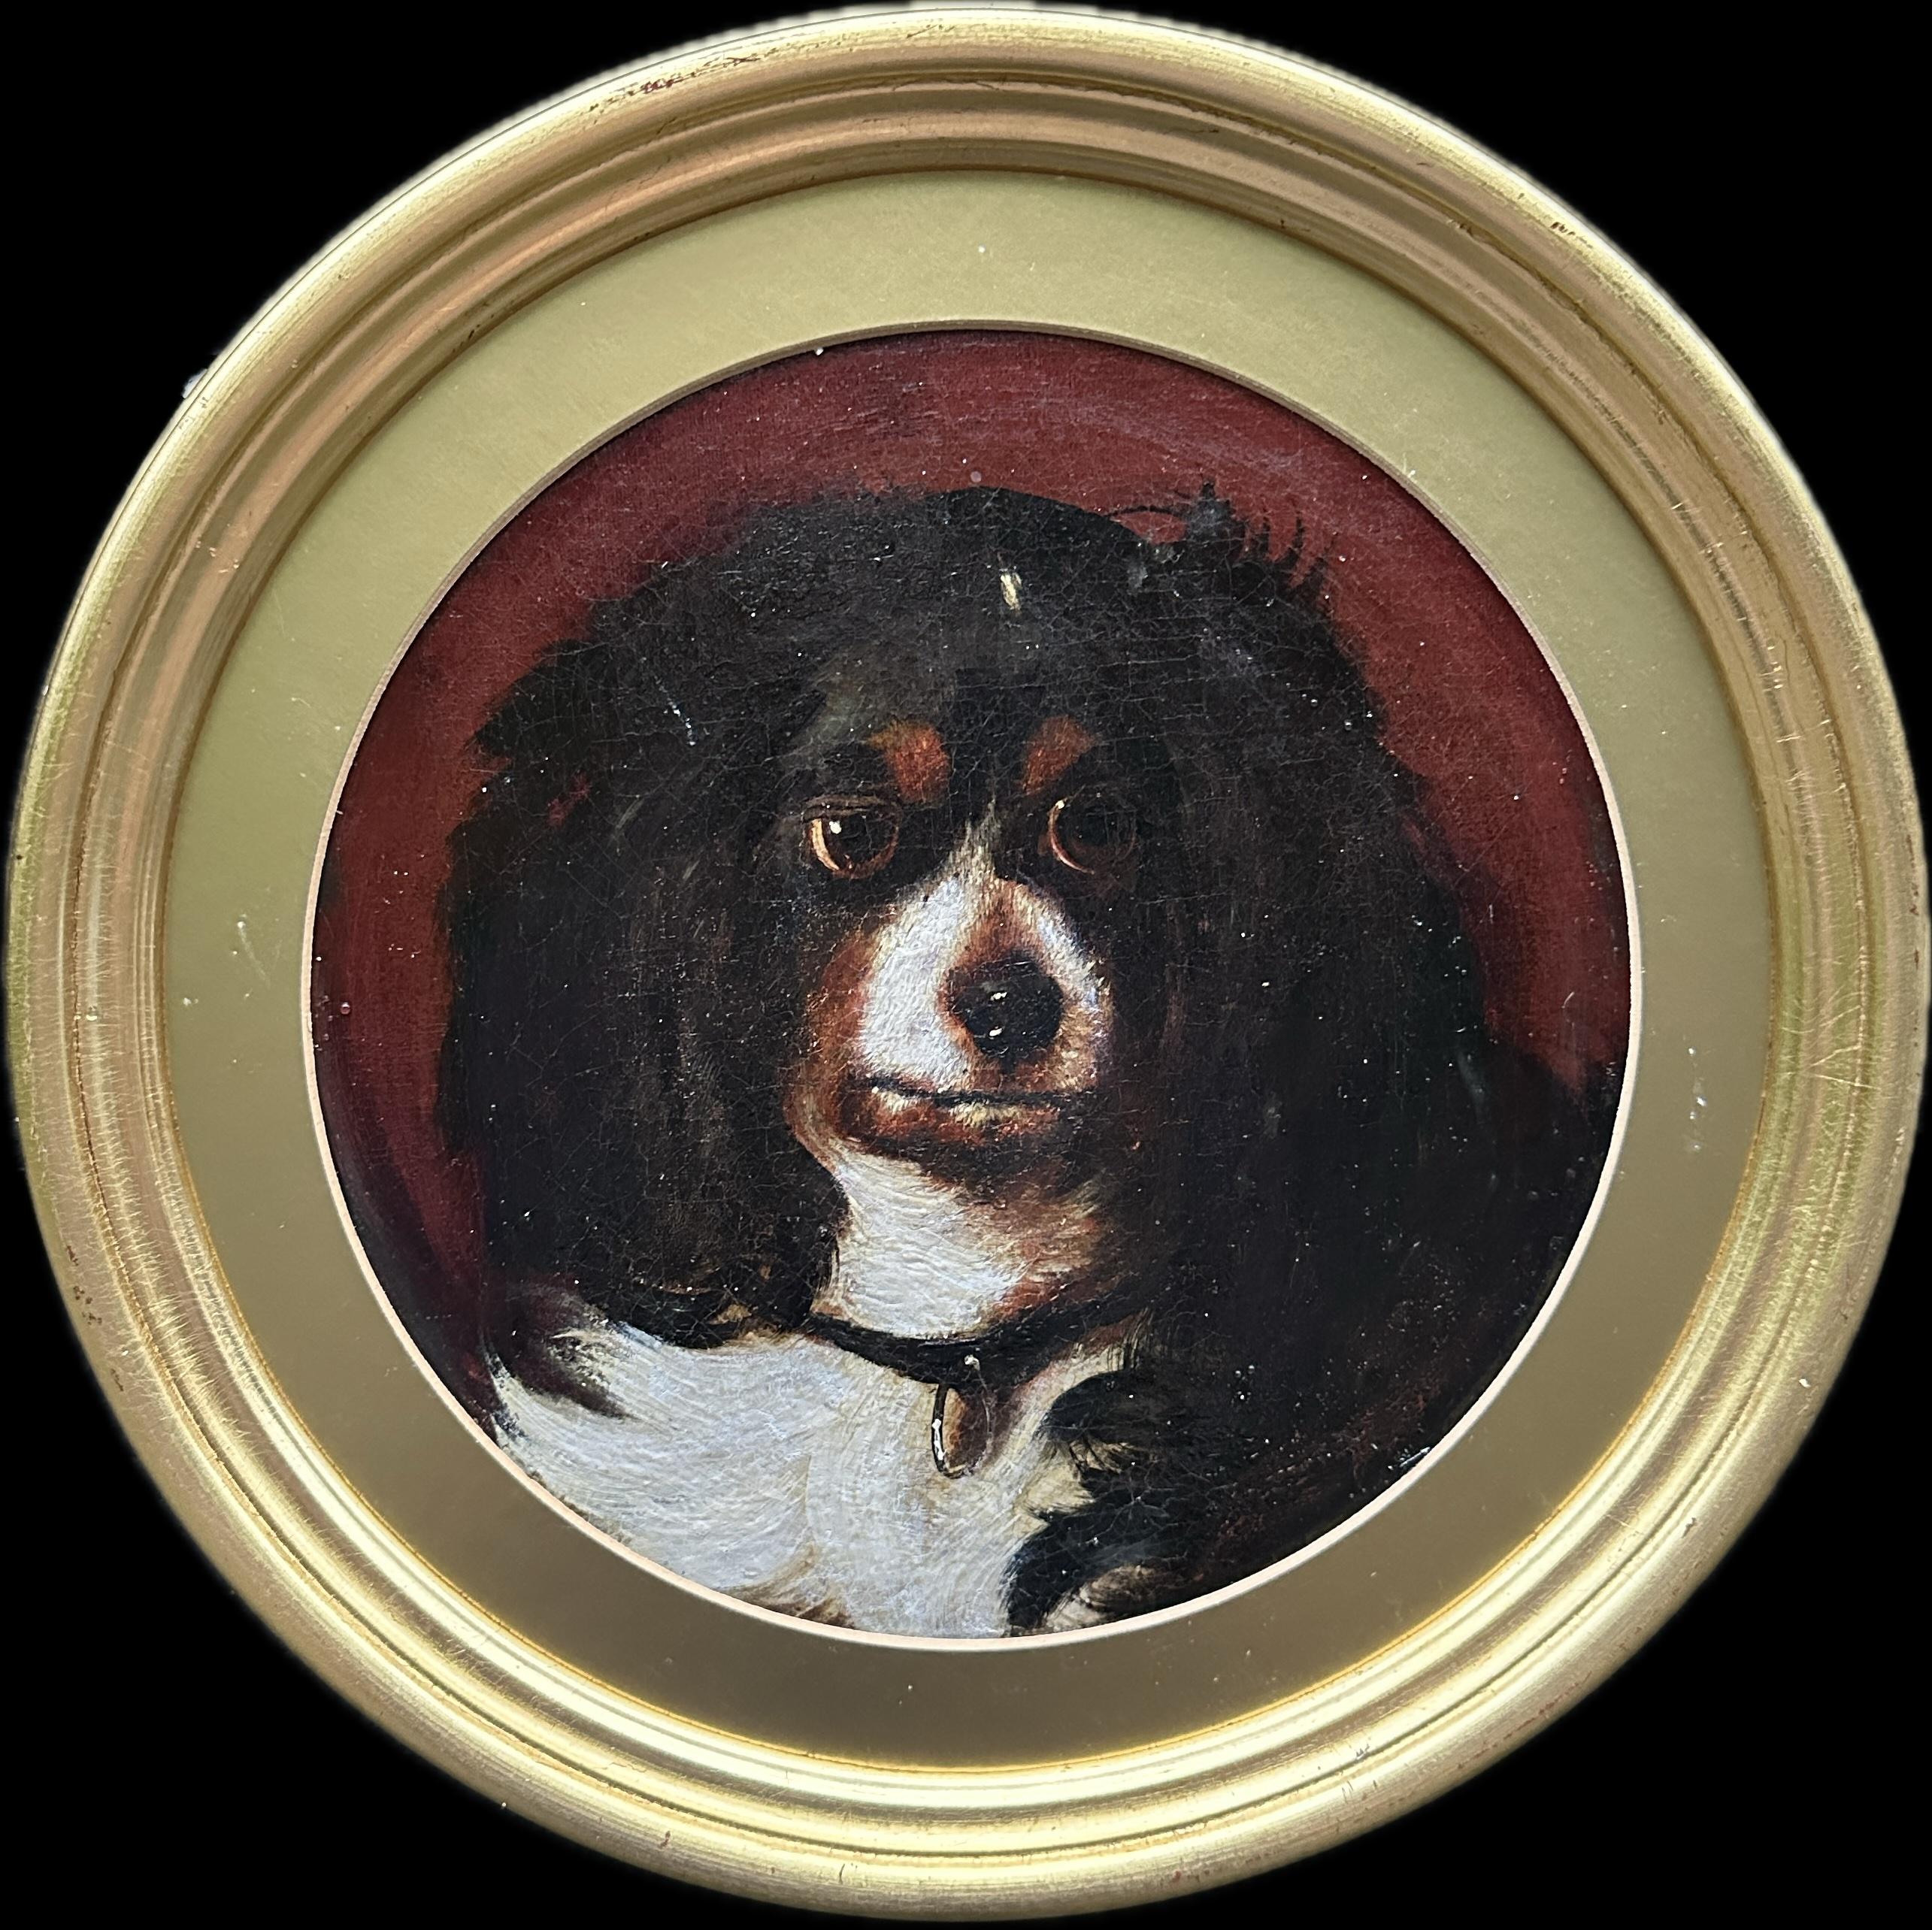 King Charles Cavalier Spaniel, 19th century English portrait of a dogs head For Sale 3